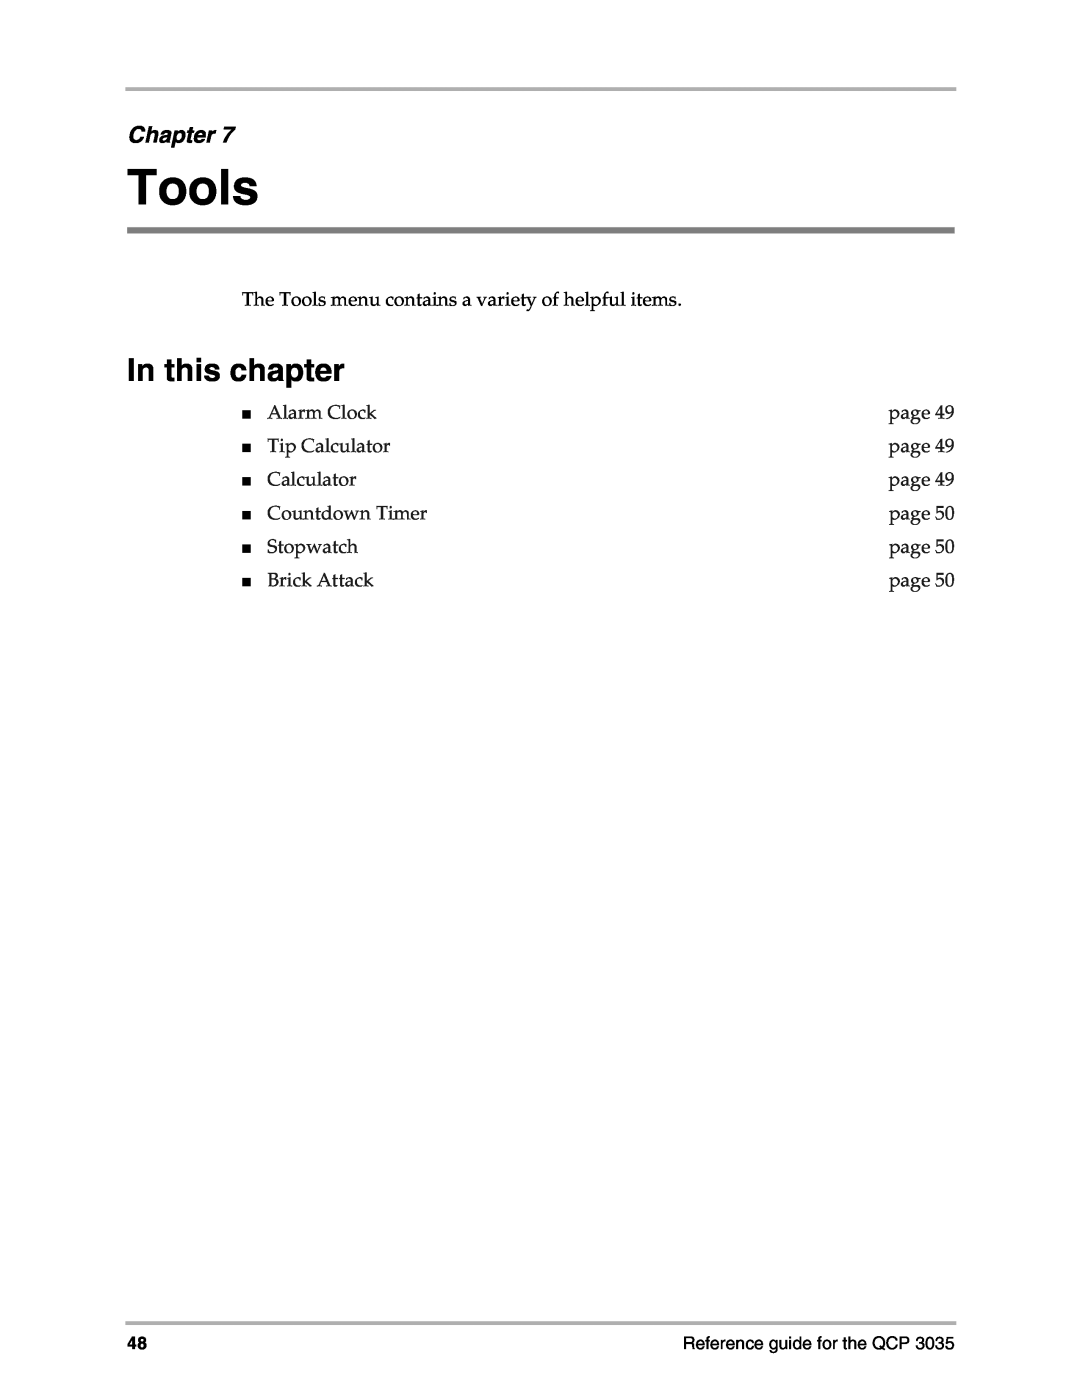 Kyocera 3035 Tools, In this chapter, Chapter, Alarm Clock, page, Tip Calculator, Countdown Timer, Stopwatch, Brick Attack 